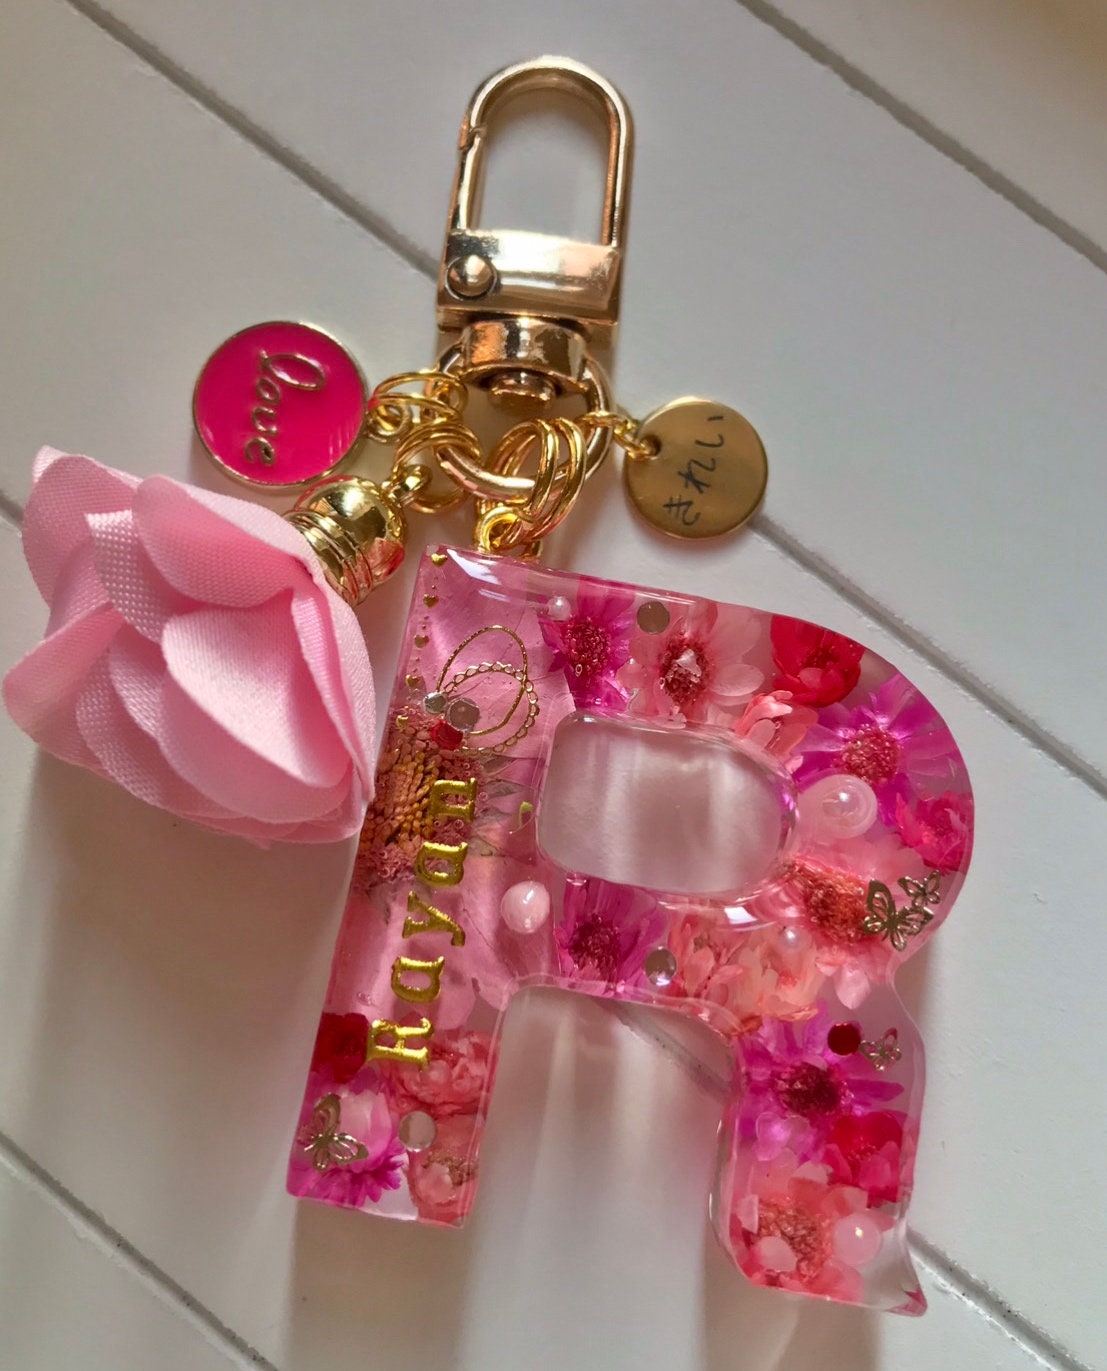 EMBROIDERED INITIAL KEYCHAIN – OOAK: ONE OF A KIND GOODS